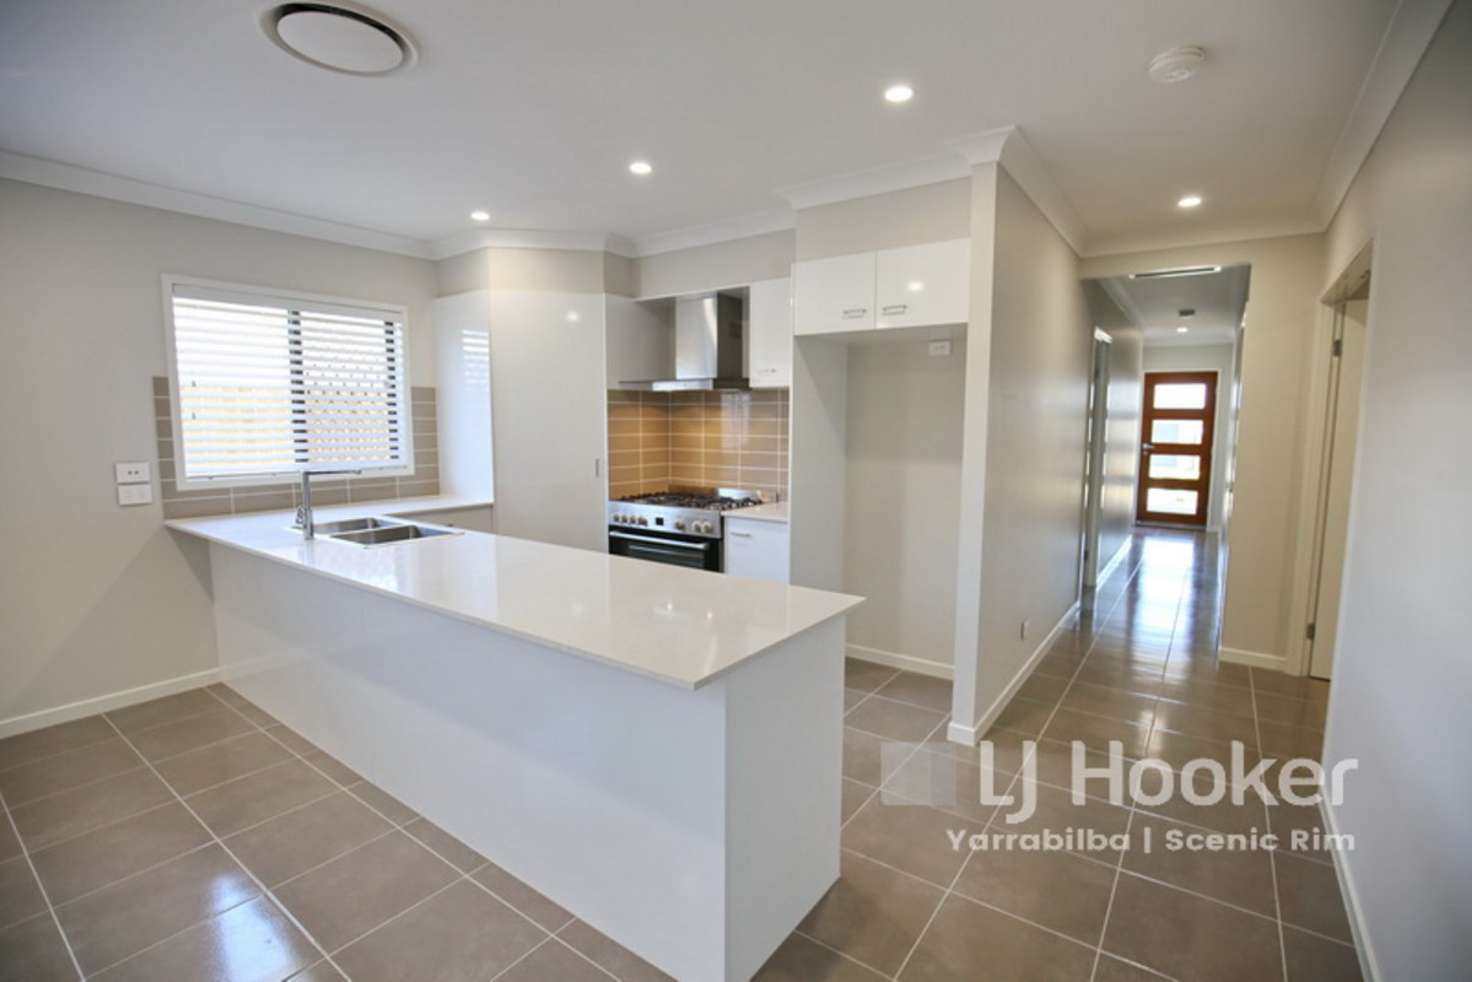 Main view of Homely house listing, 10 Bright Street, Yarrabilba QLD 4207